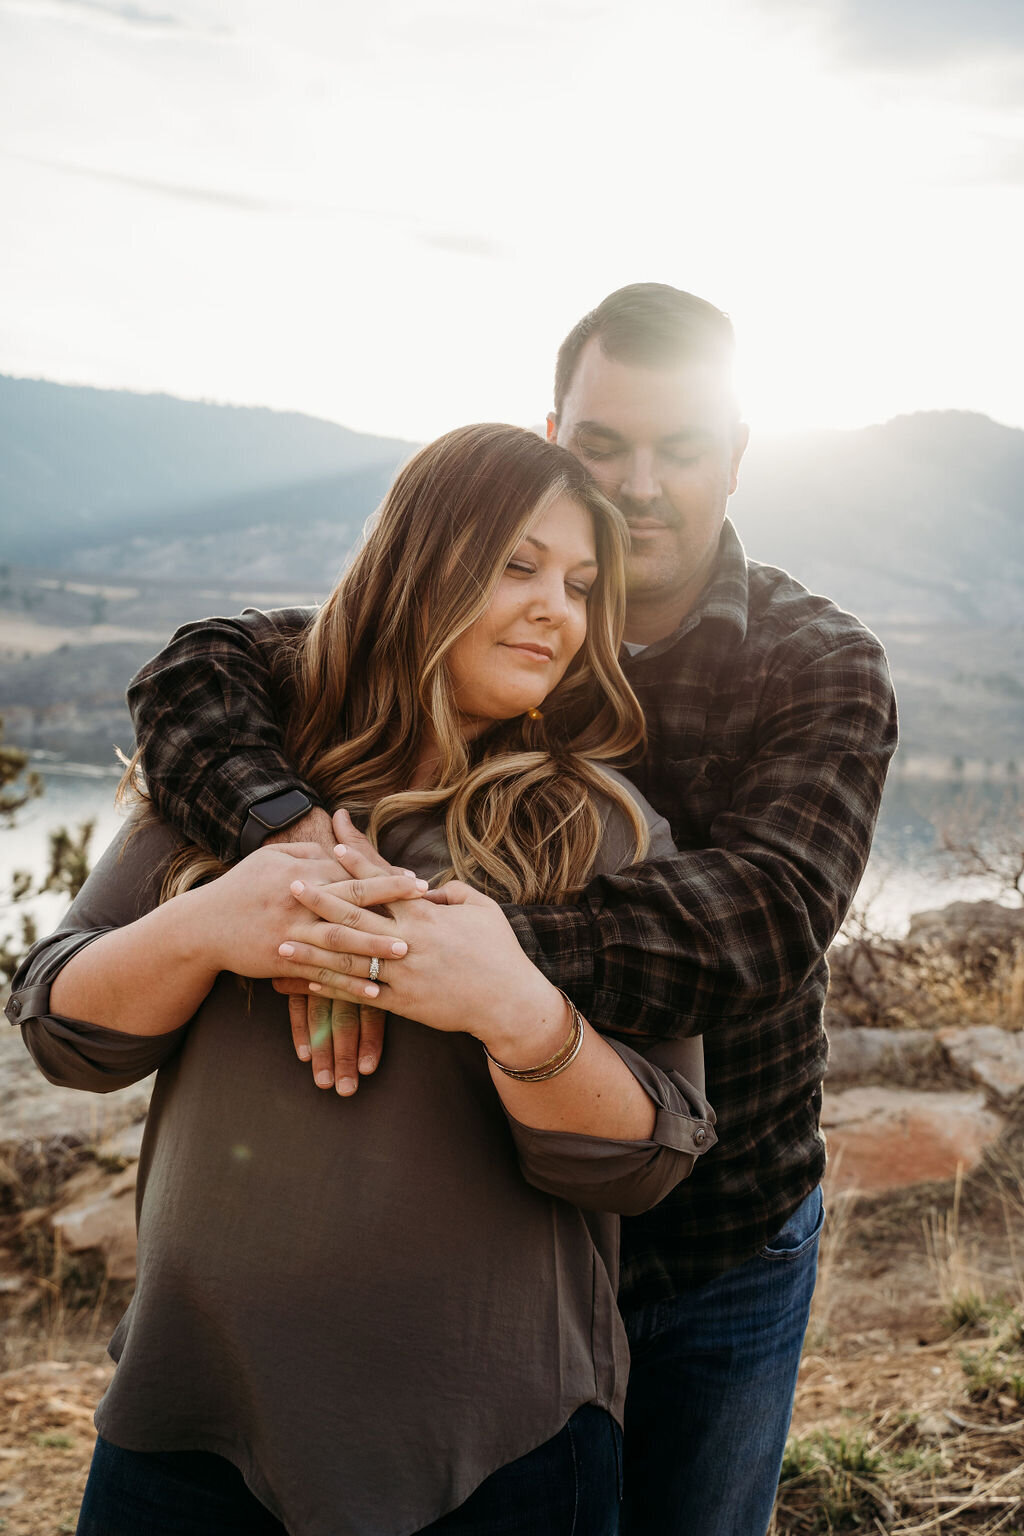 engagement photographer in fort collins colorado, wedding photographer